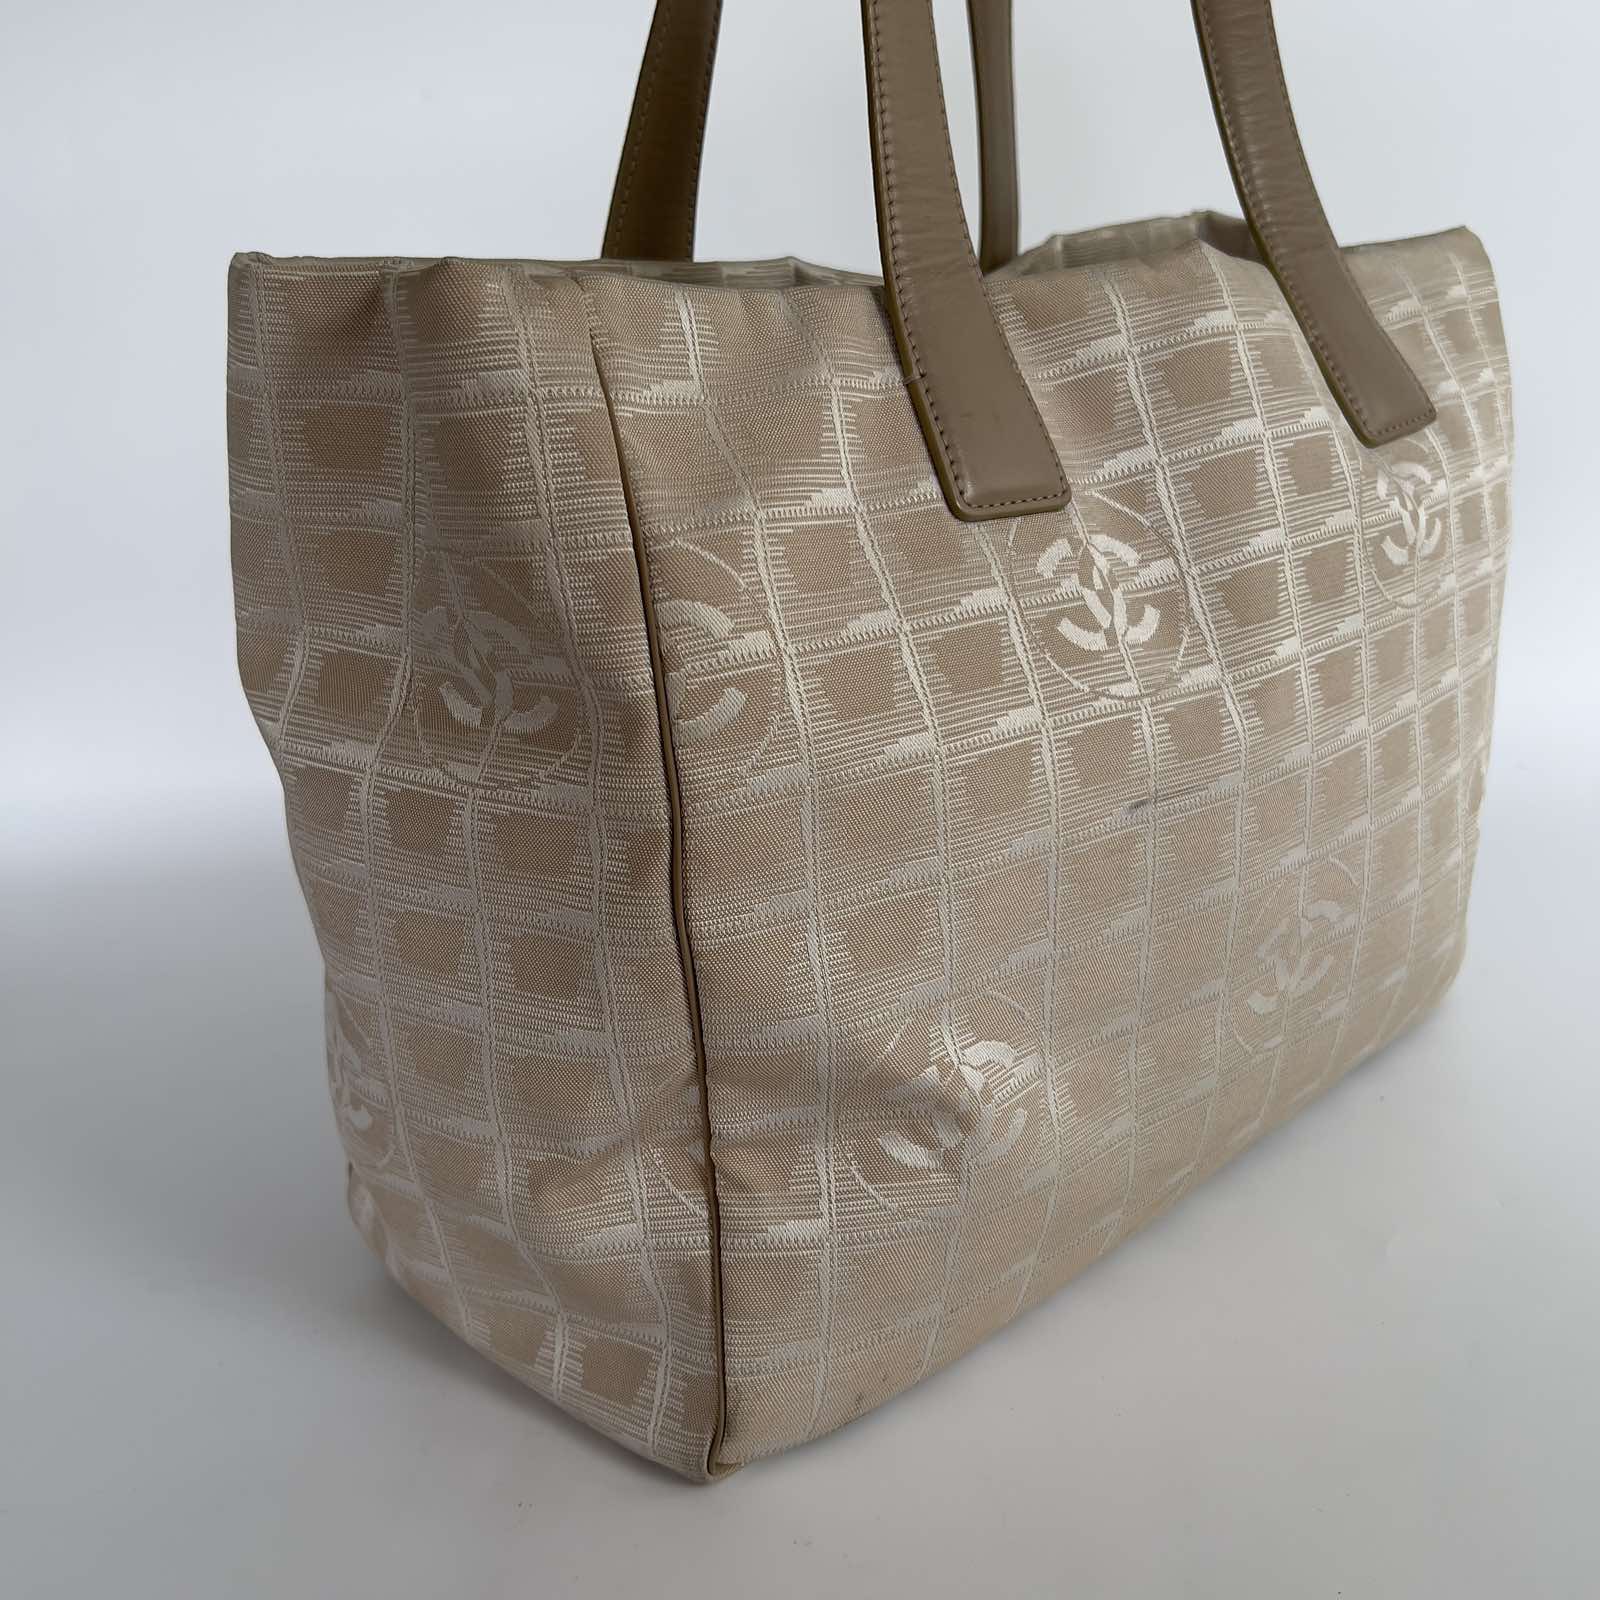 Chanel Camelia Beige Tote Bag. Series 8xxxxxx. Made in Italy. No inclusions  ❤️ - Canon E-Bags Prime